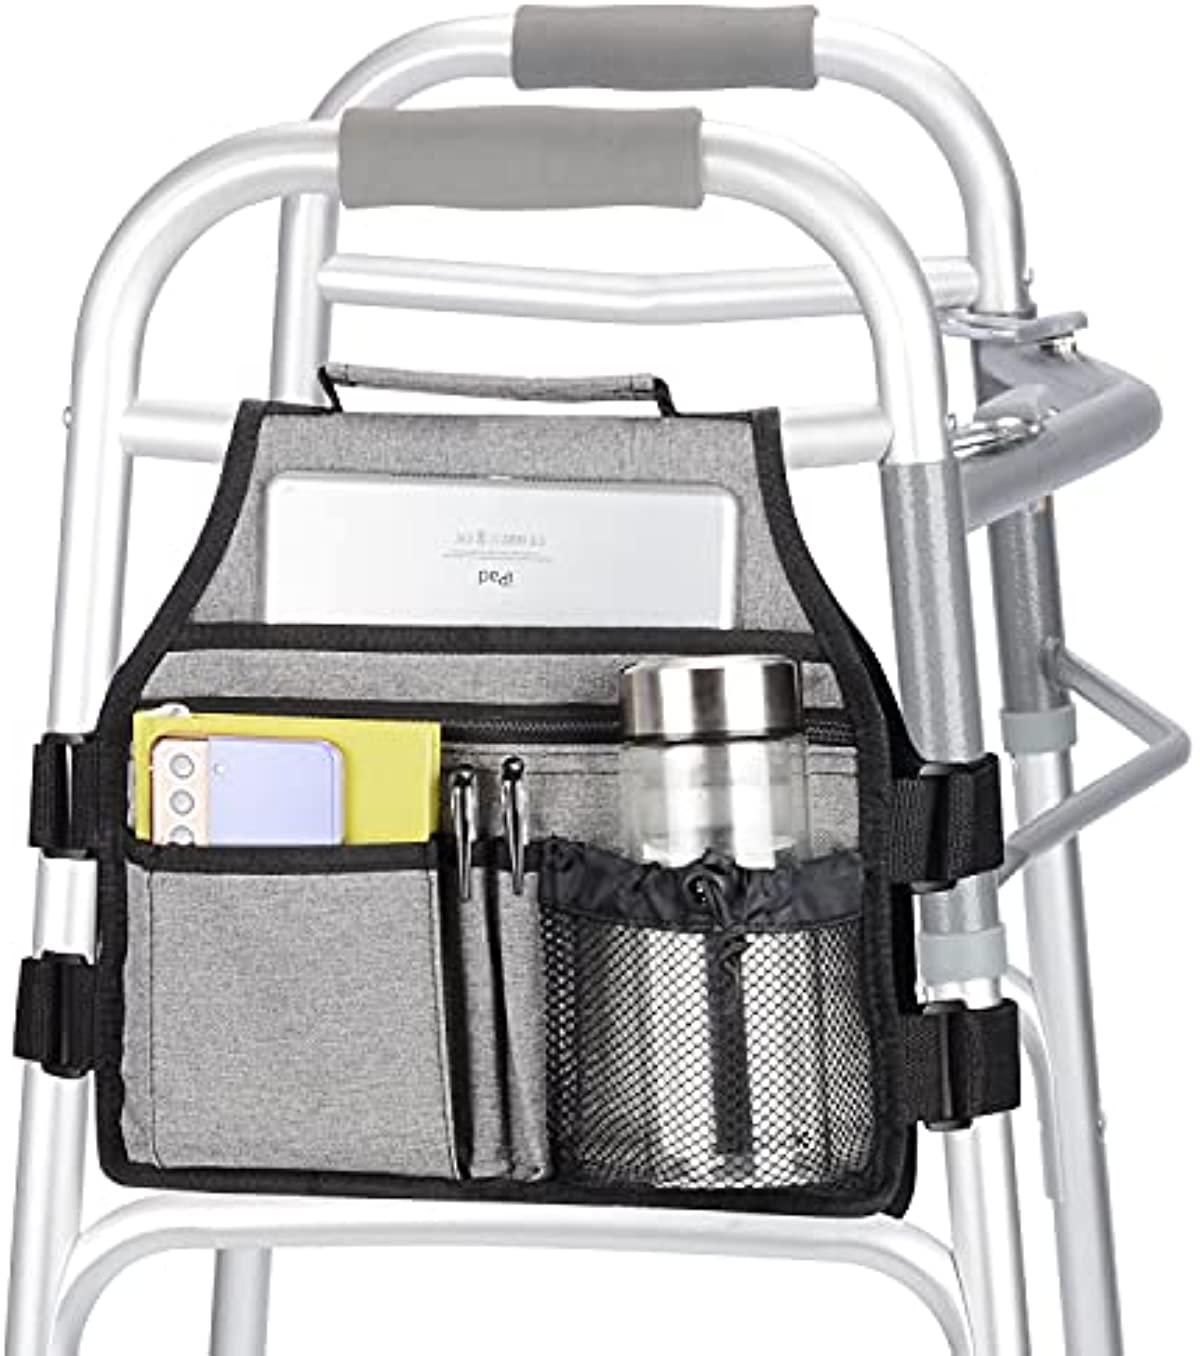 YF Side Walker Bag, DoubleSided Folding Walker Side Bags Storage Organizer Pouch with 8 Pockets, Waterproof Easy Access Elderly Walker Side Accessories with Handle and Mesh Cup Holder, Gray